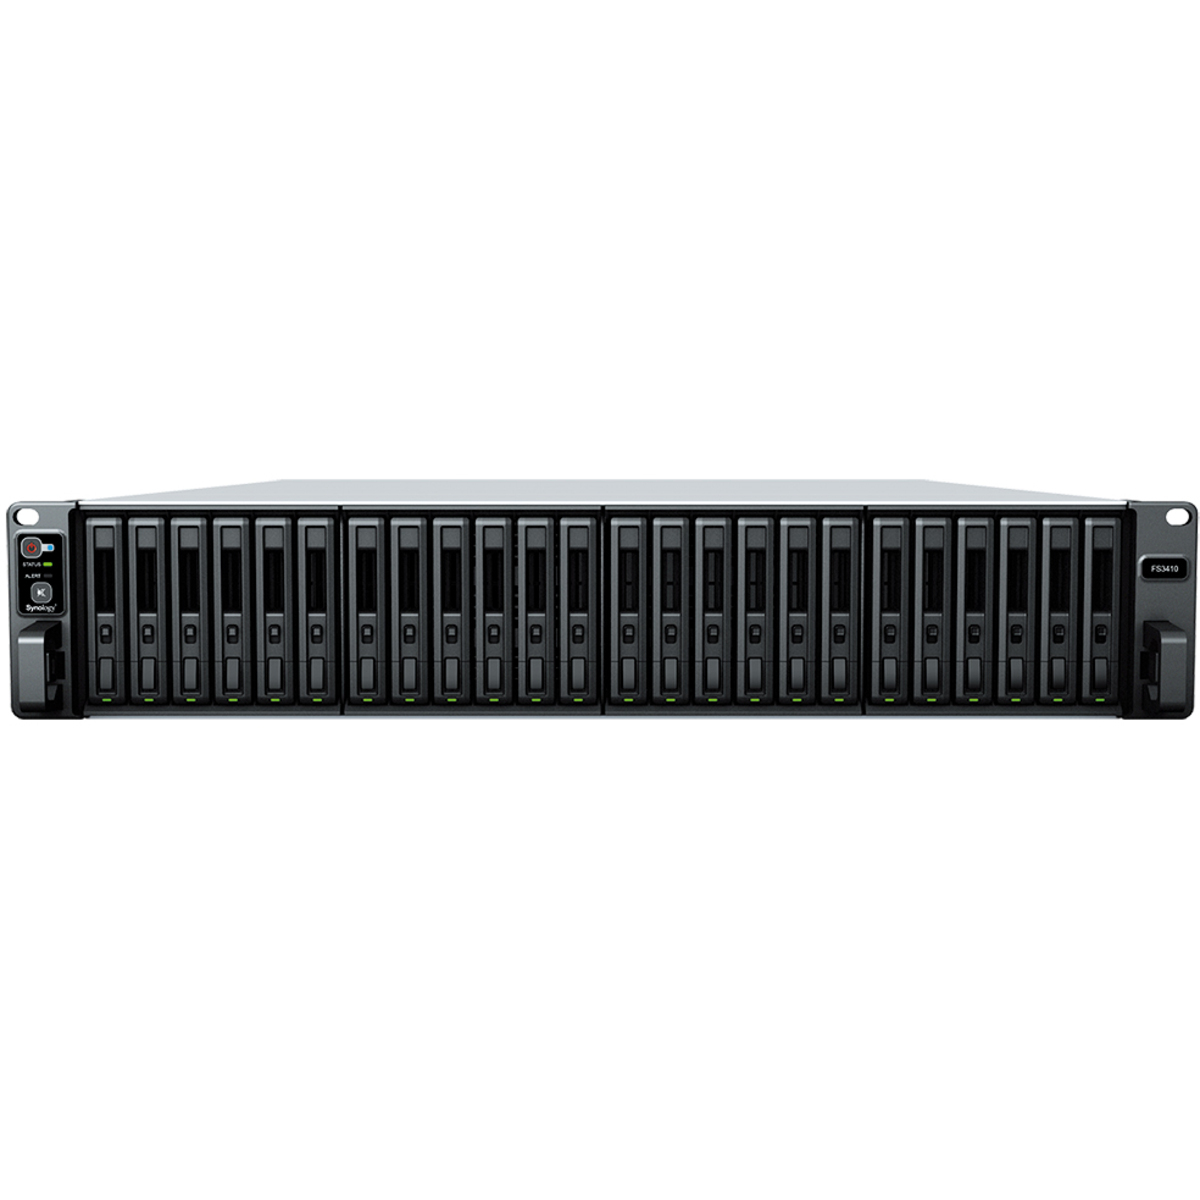 Synology FlashStation FS3410 68tb 24-Bay RackMount Large Business / Enterprise NAS - Network Attached Storage Device 17x4tb Crucial MX500 CT4000MX500SSD1 2.5 560/510MB/s SATA 6Gb/s SSD CONSUMER Class Drives Installed - Burn-In Tested FlashStation FS3410